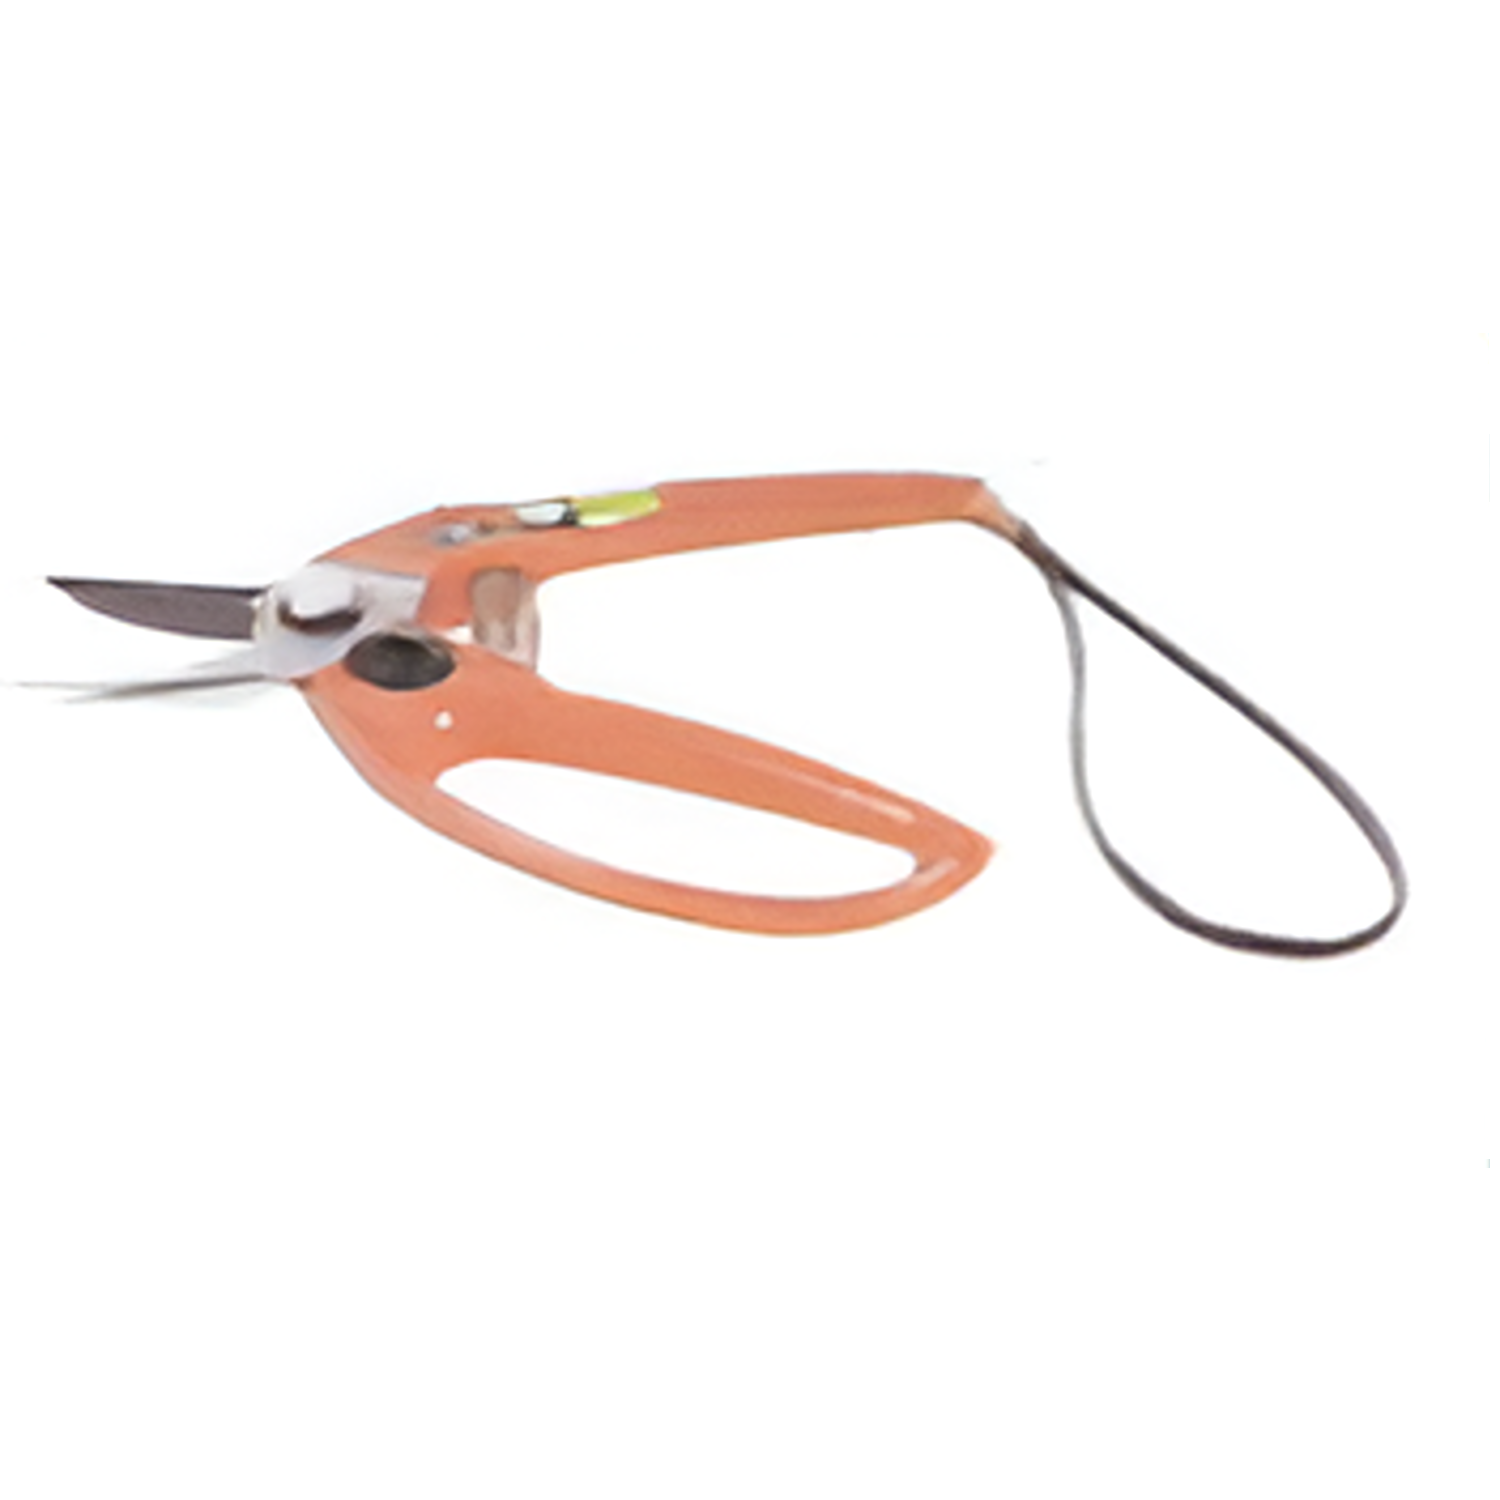 YEW AIK Pruning Shear- 1261 8” Extra Heavy Duty Non-Slip Handle - Premium Pruning Shear from YEW AIK - Shop now at Yew Aik.